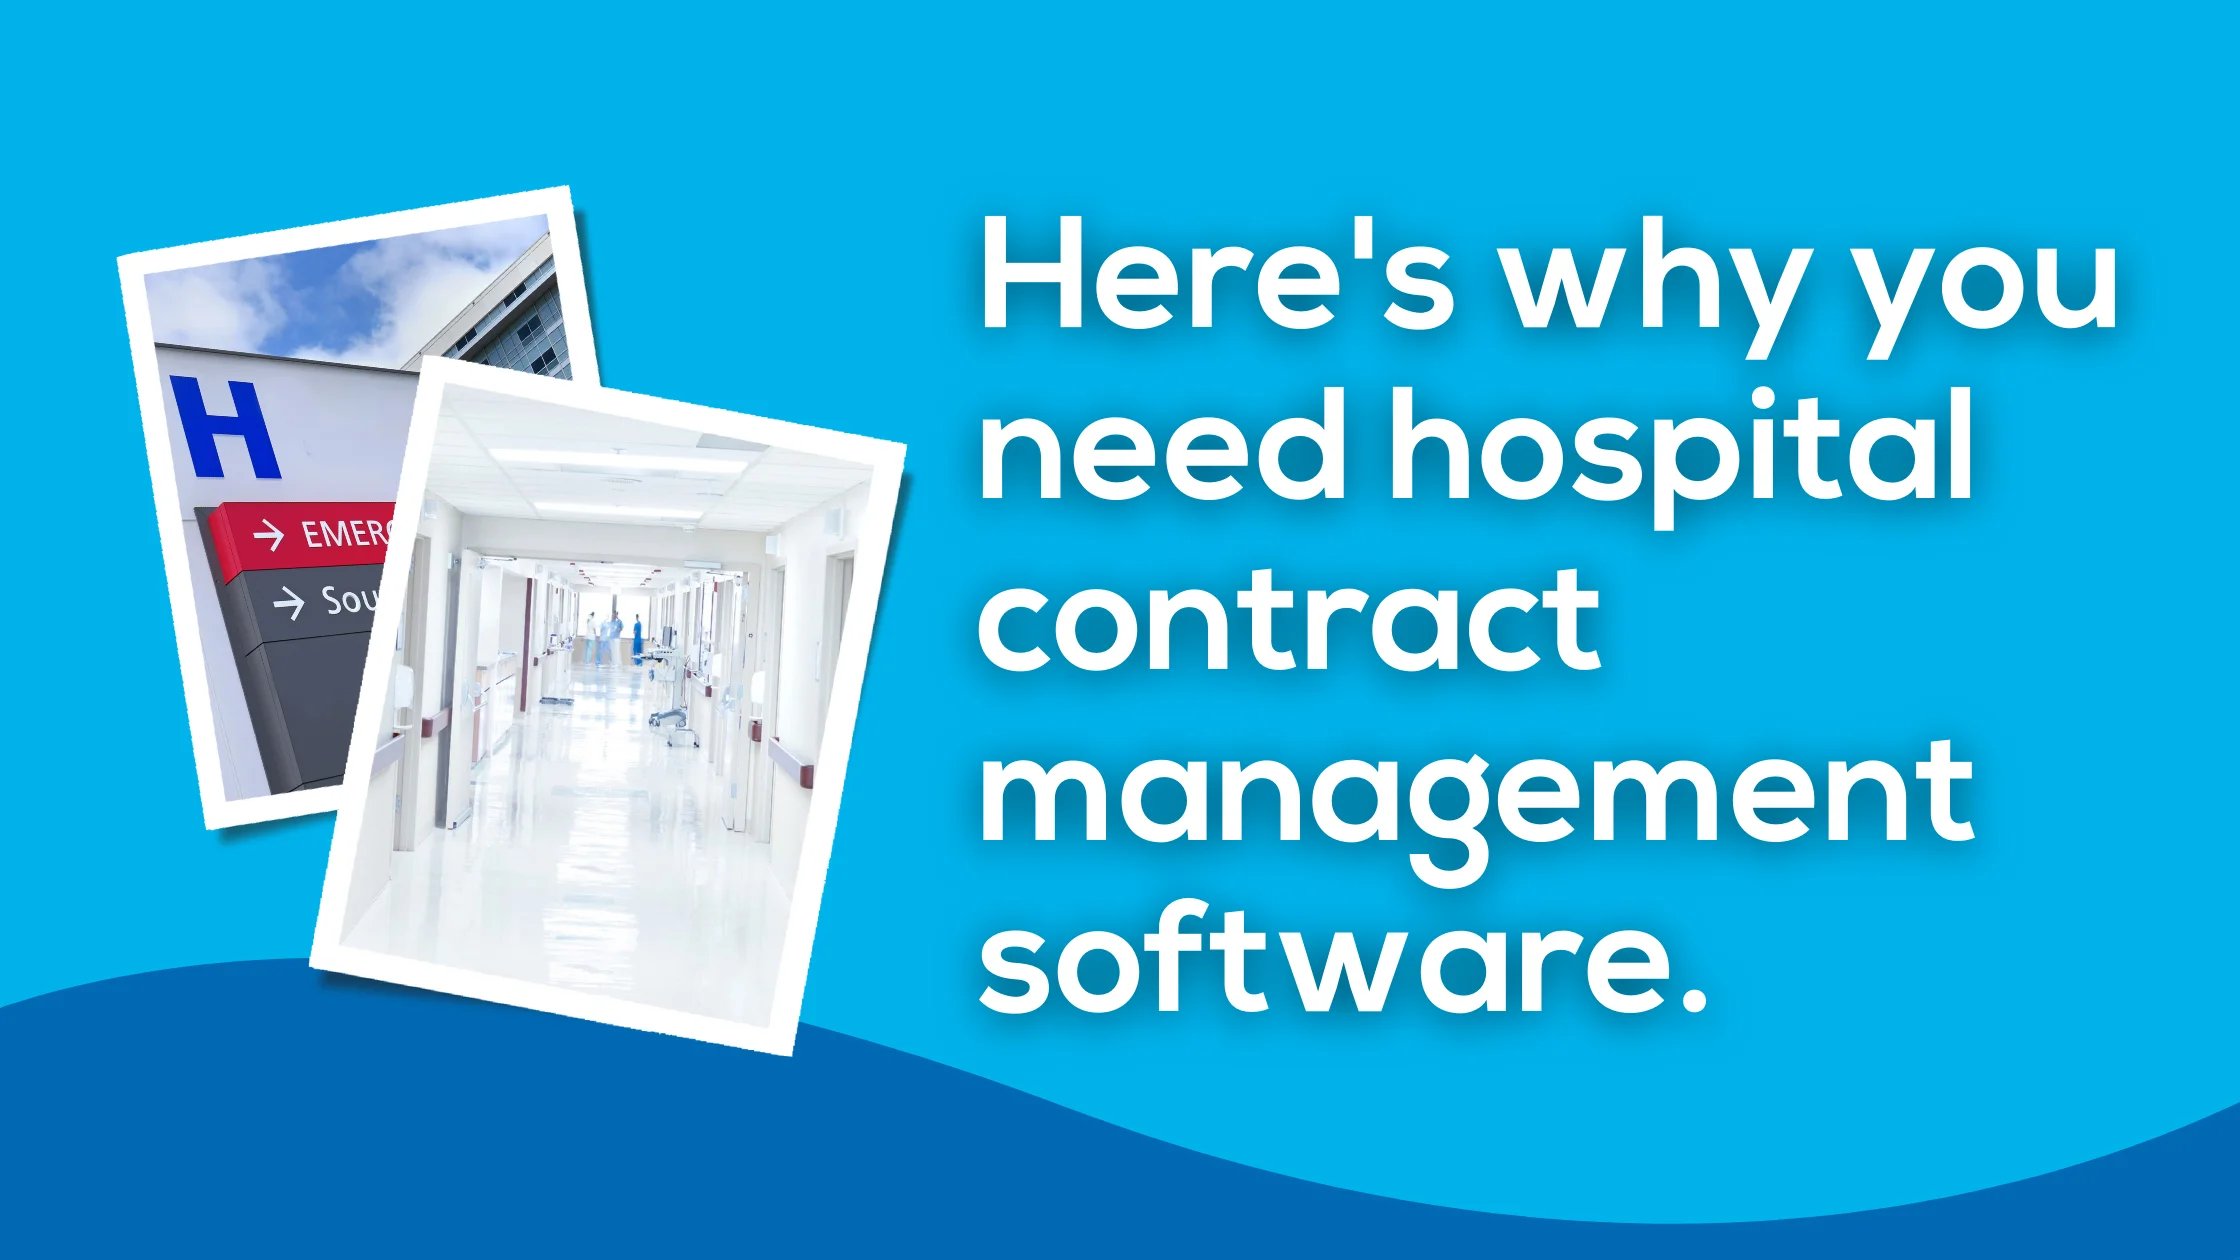 Heres why you need hospital contract management software. (1)